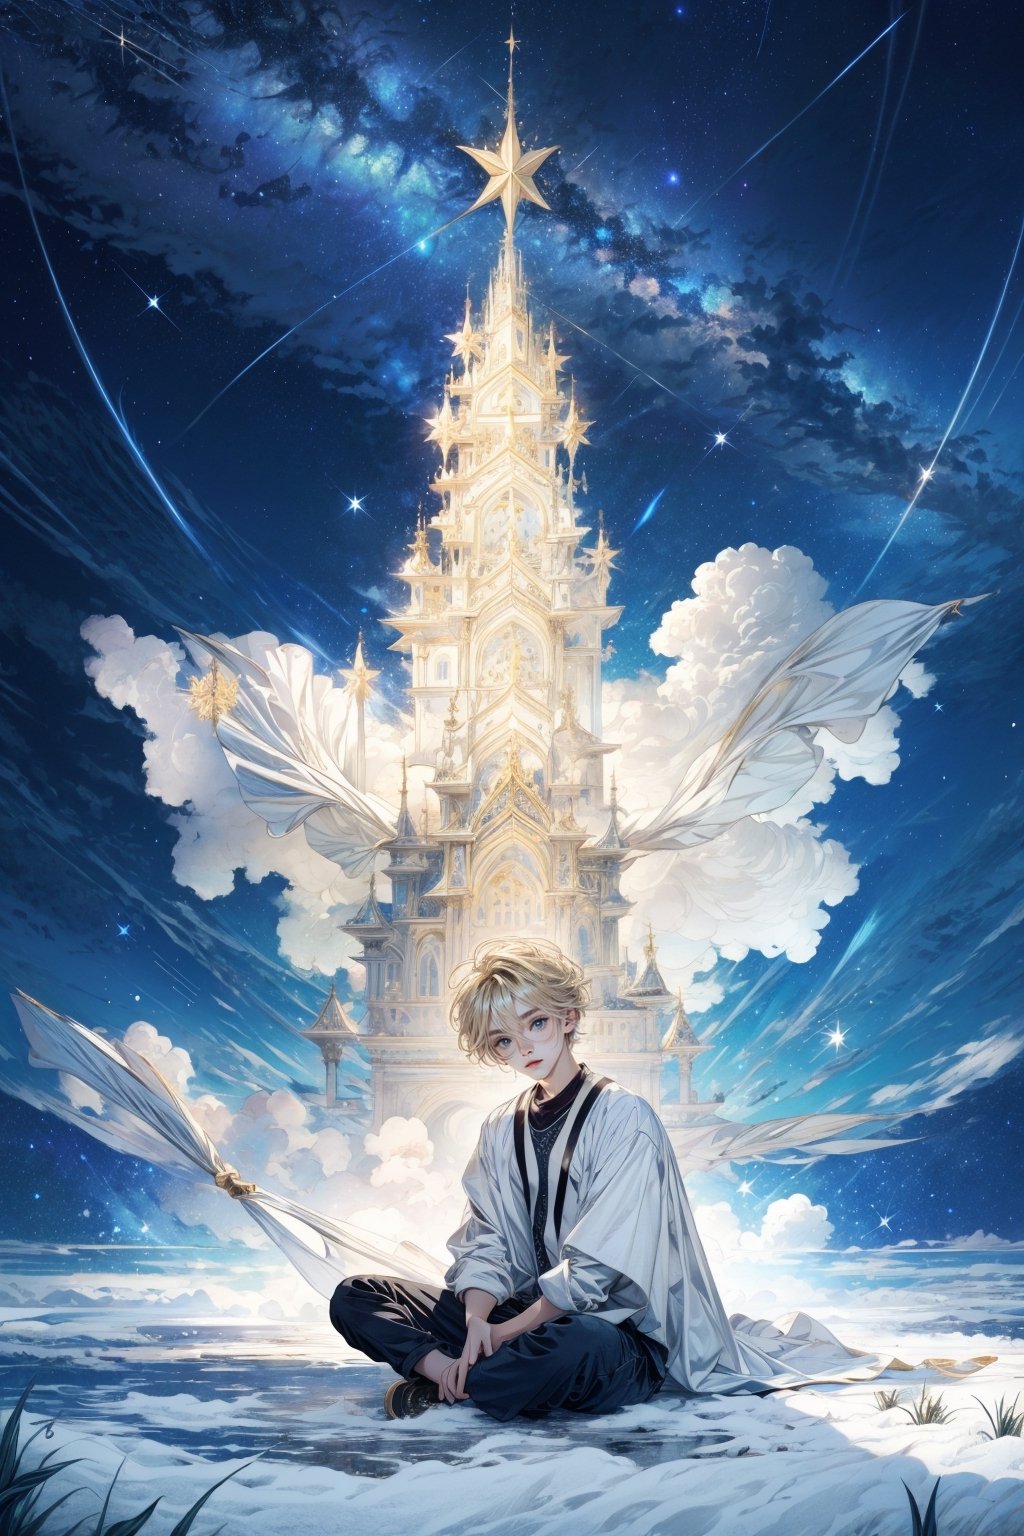  a starry sky at night, with a blond boy dressed in white sitting on the ground.